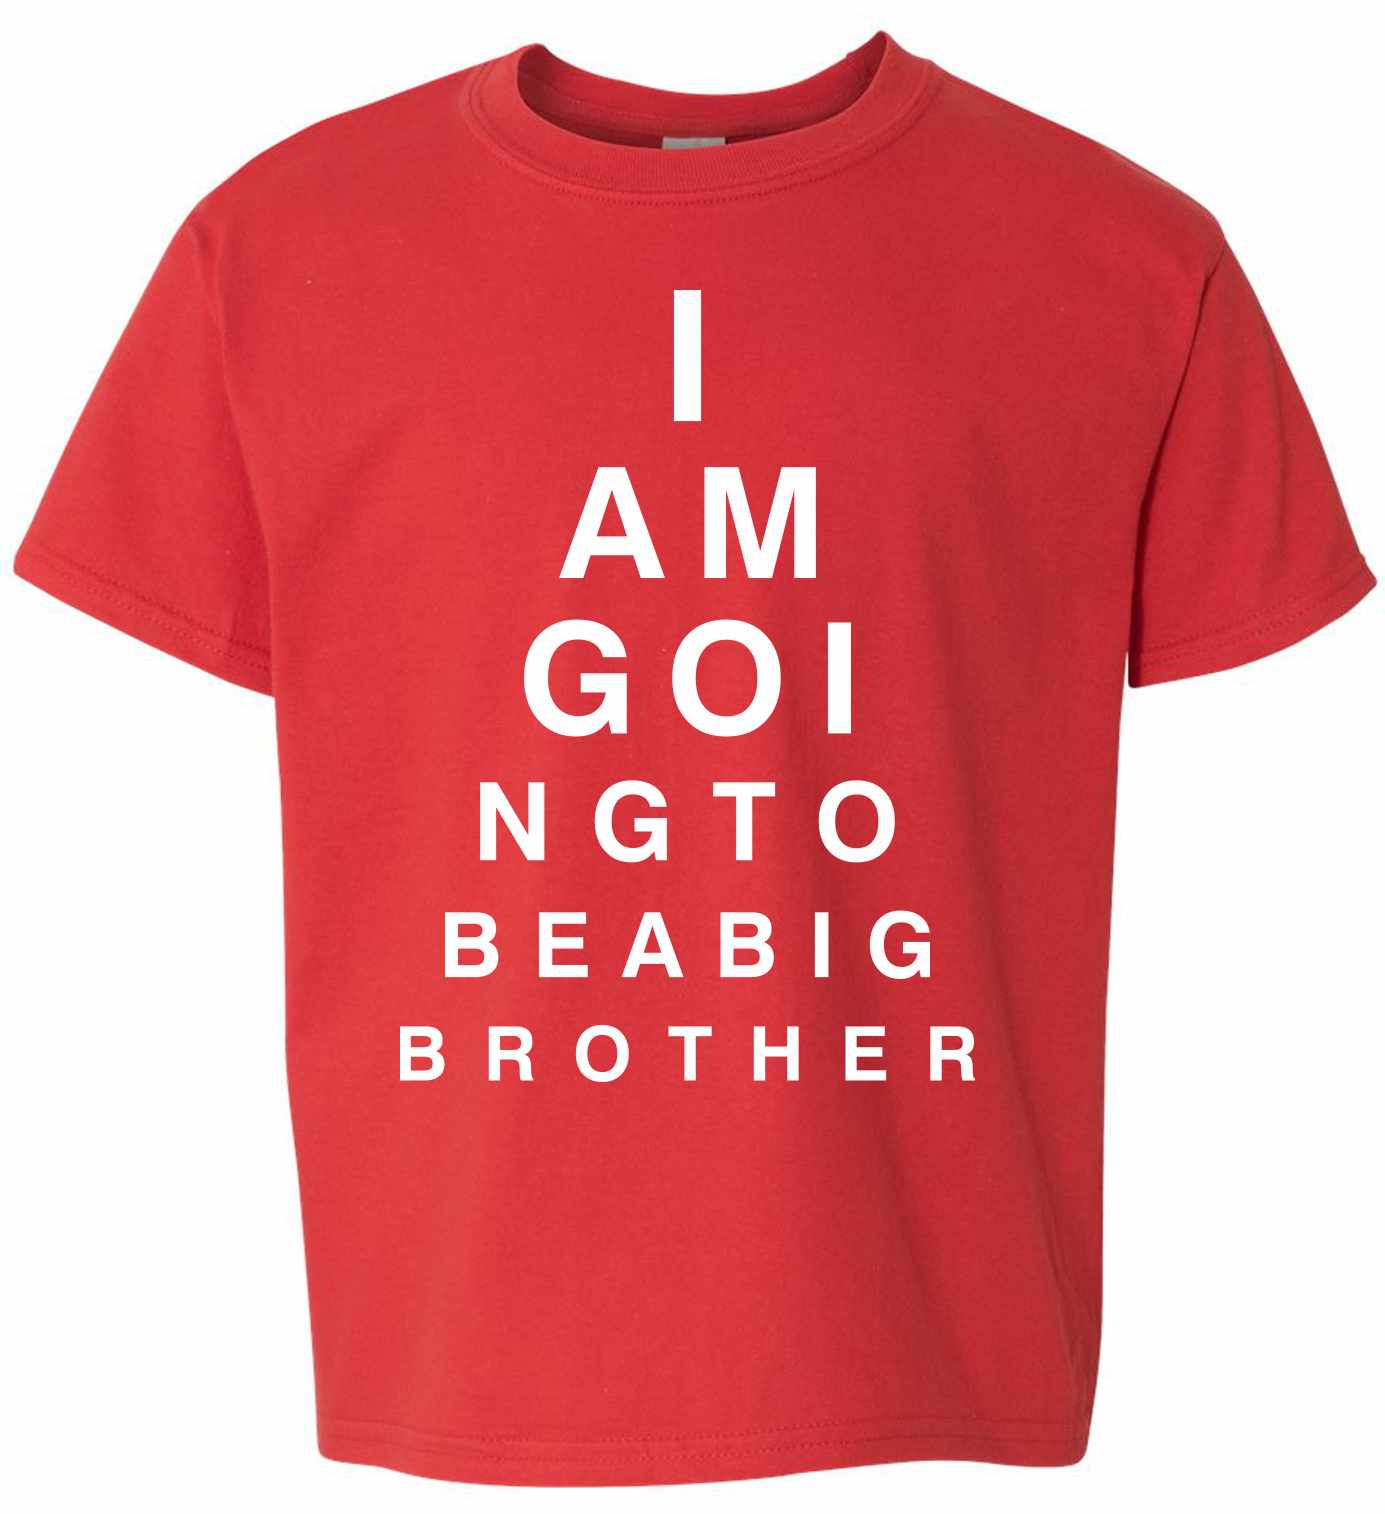 I AM GOING TO BE BIG BROTHER EYE CHART on Youth T-Shirt